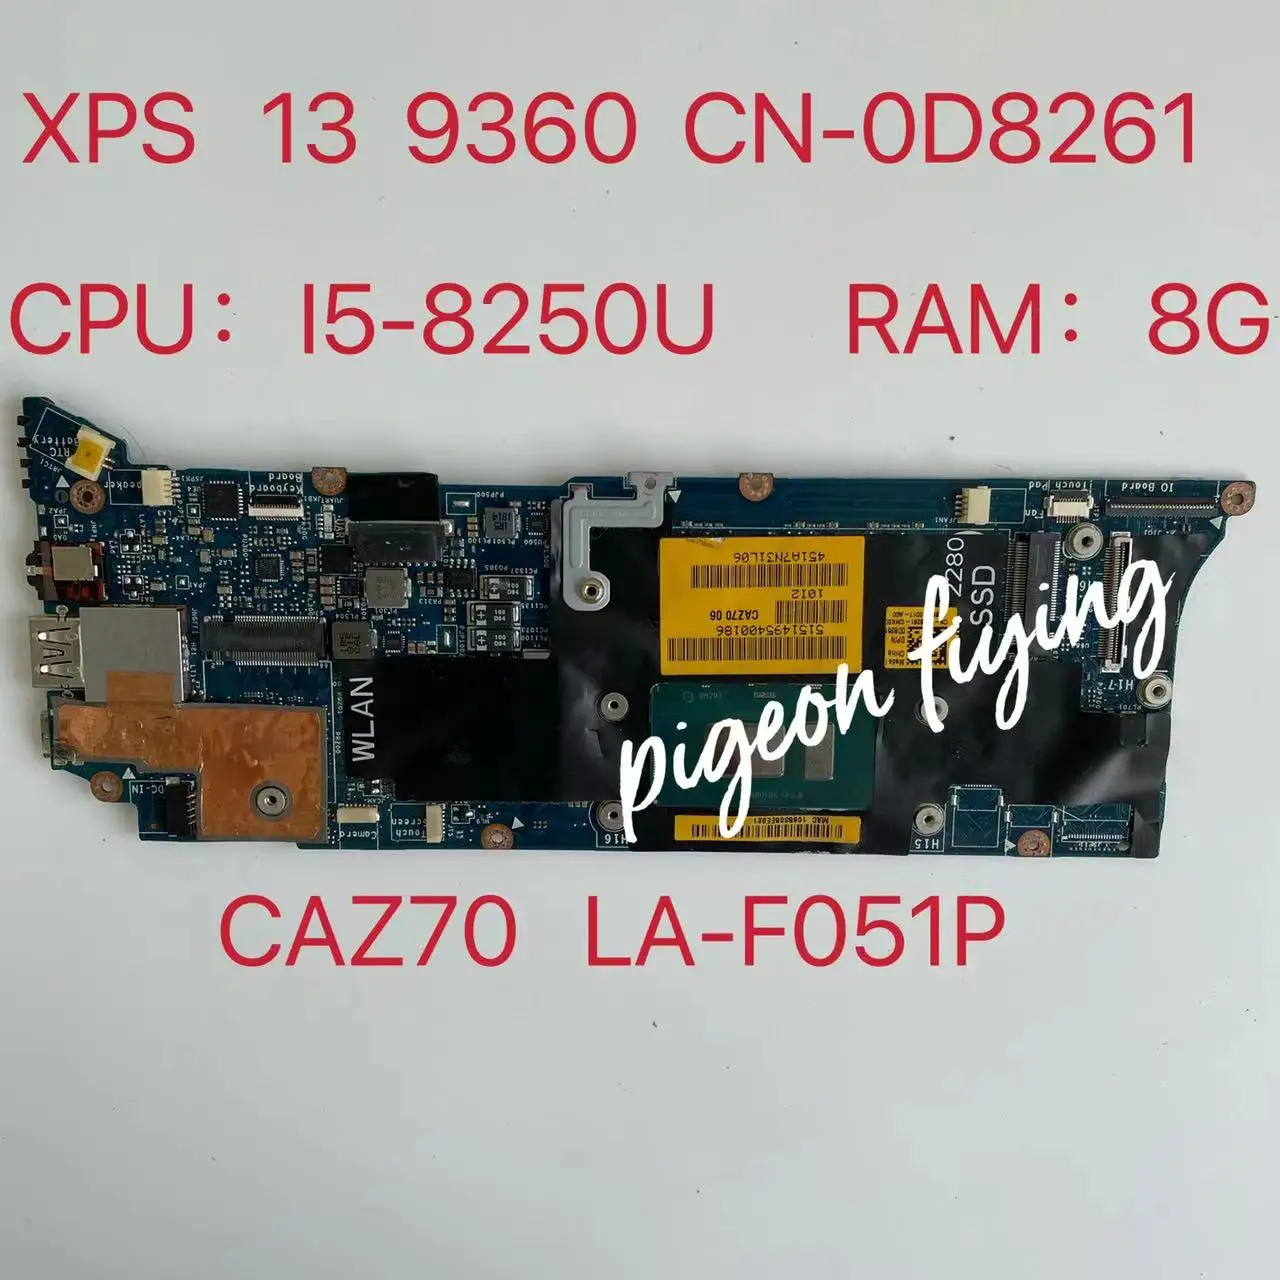 

CAZ70 LA-F051P Mainboard For Dell XPS 13 9360 Laptop Motherboard With CPU I5-8250U RAM 8G CN- 0D8261 0D8261 D8261 100% Test OK